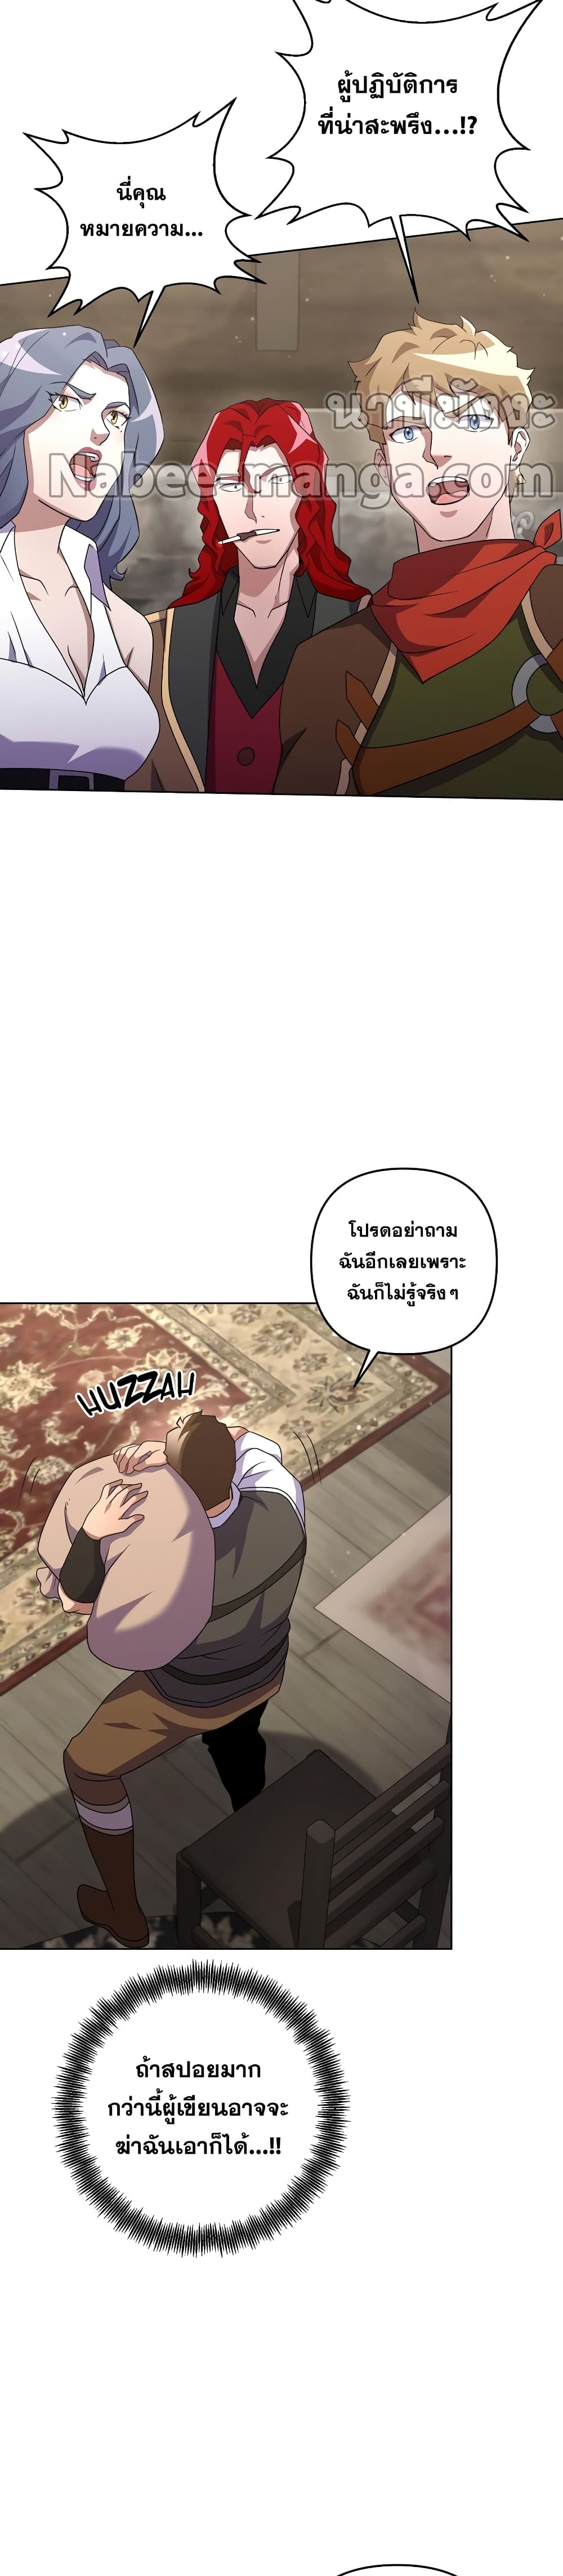 Surviving in an Action Manhwa 25 (13)